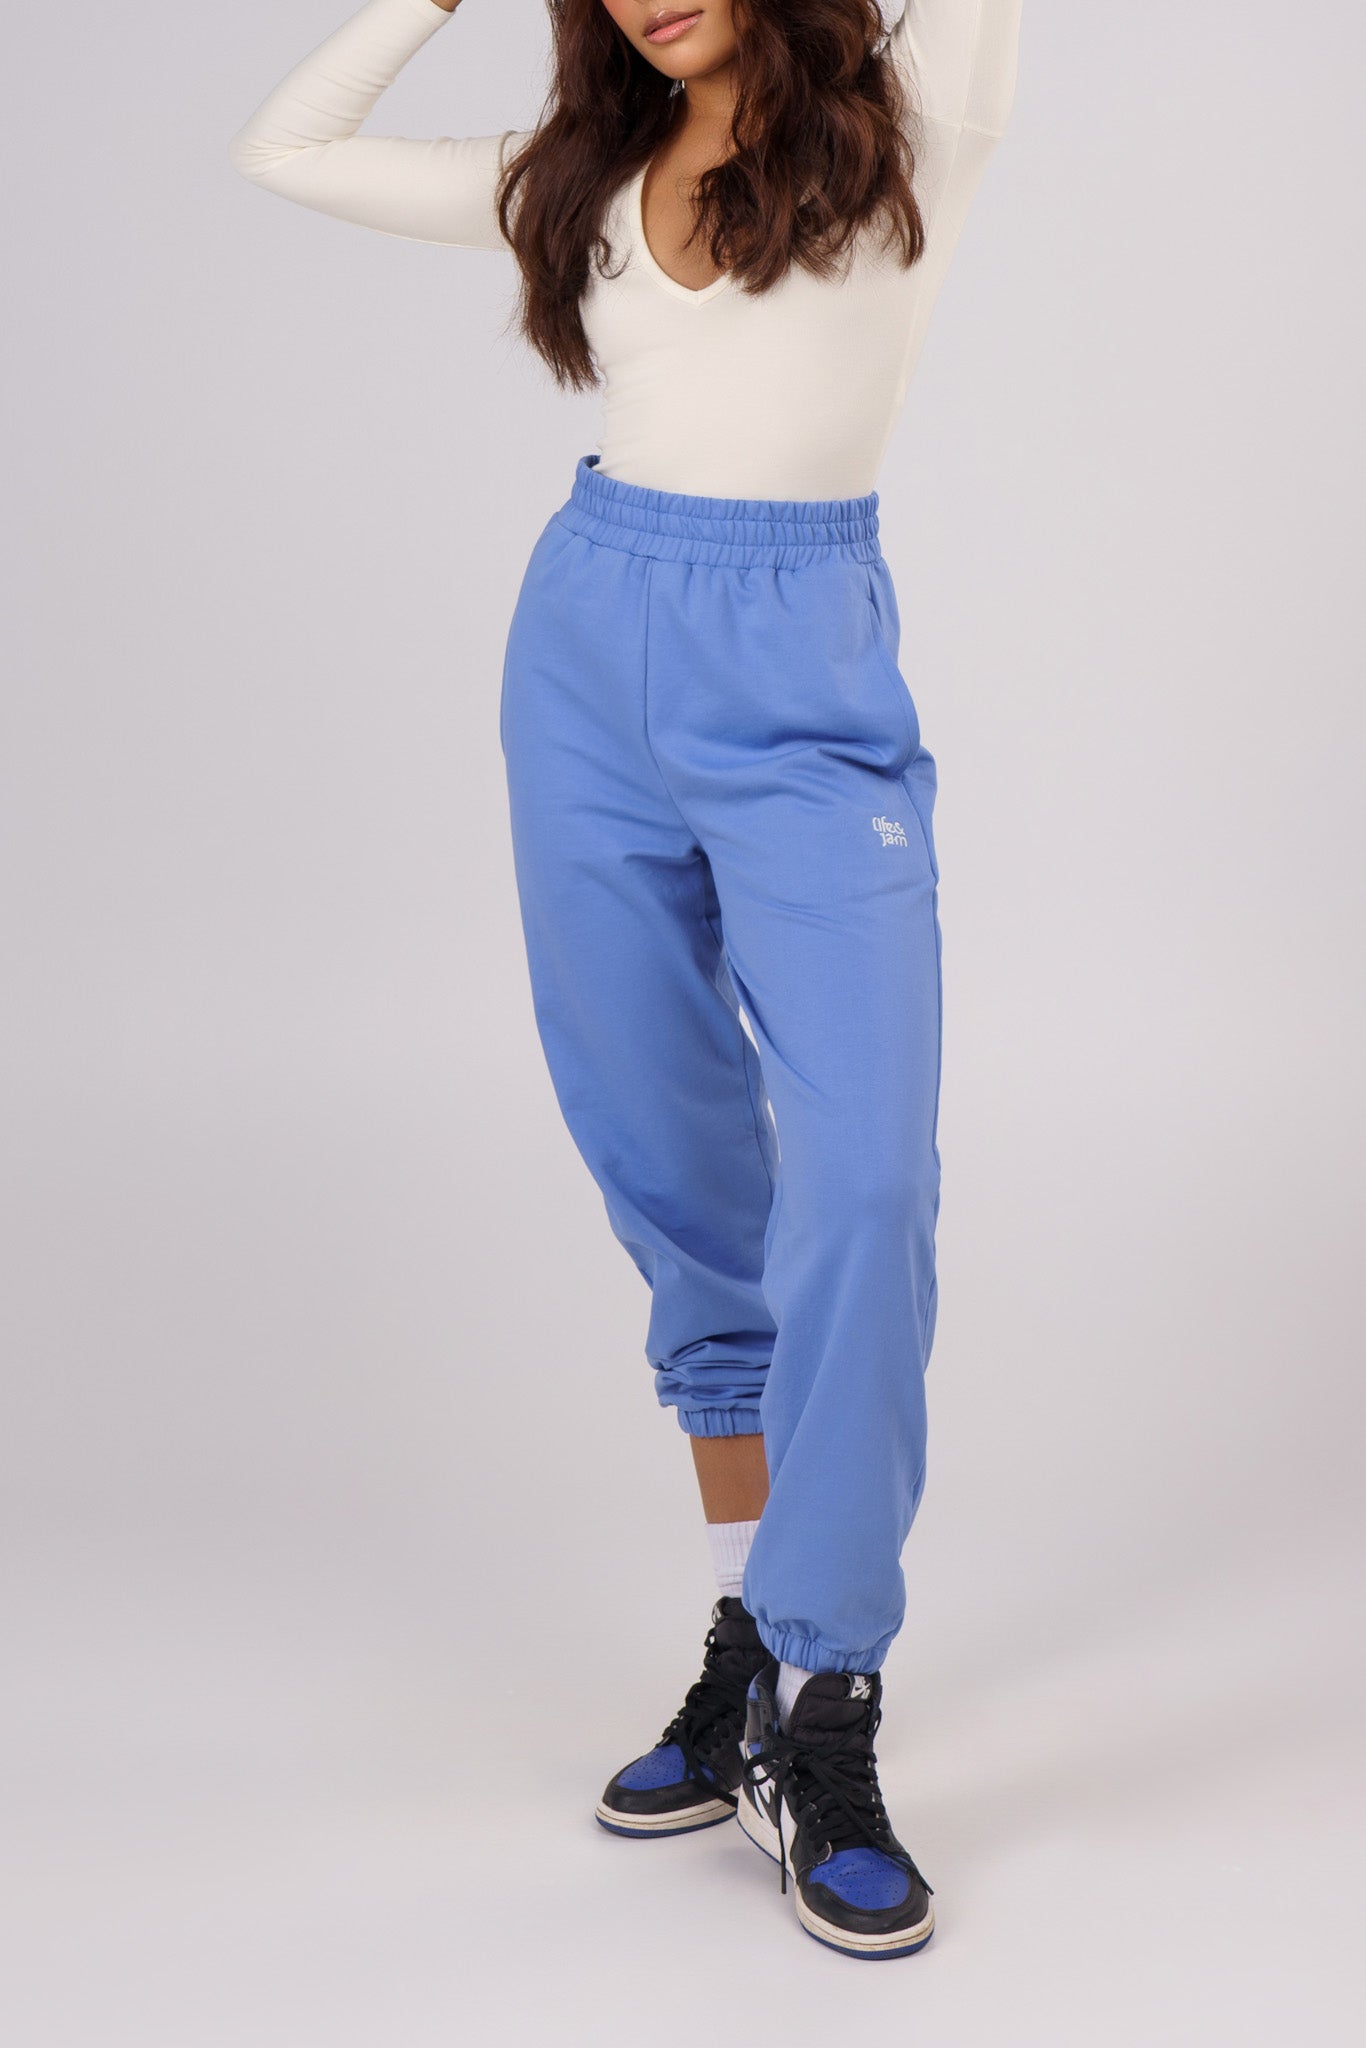 Buy High Waist Always Comfy Joggers In Bubble Blue Online - Life & Jam